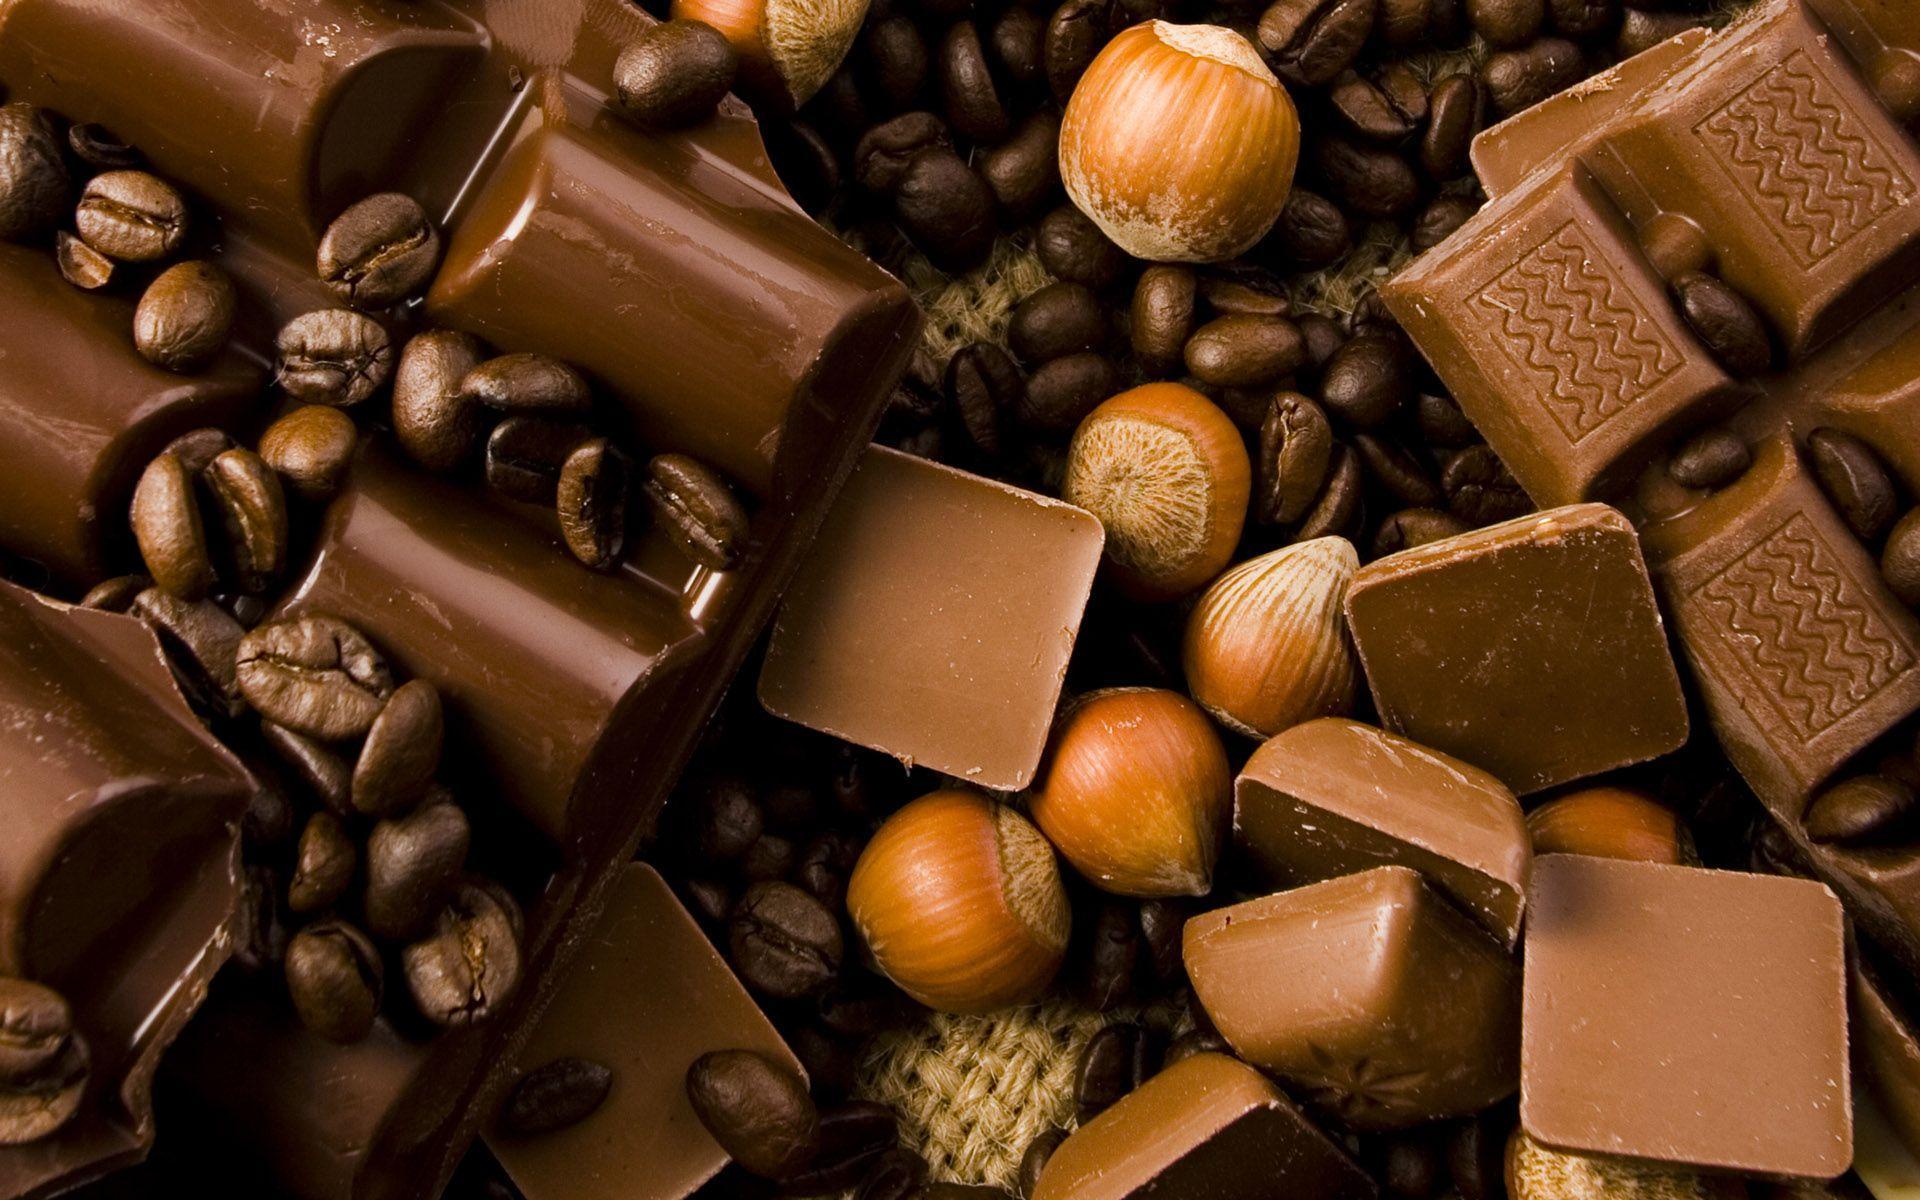 HDQ Chocolates Image Collection for Desktop, VV.38